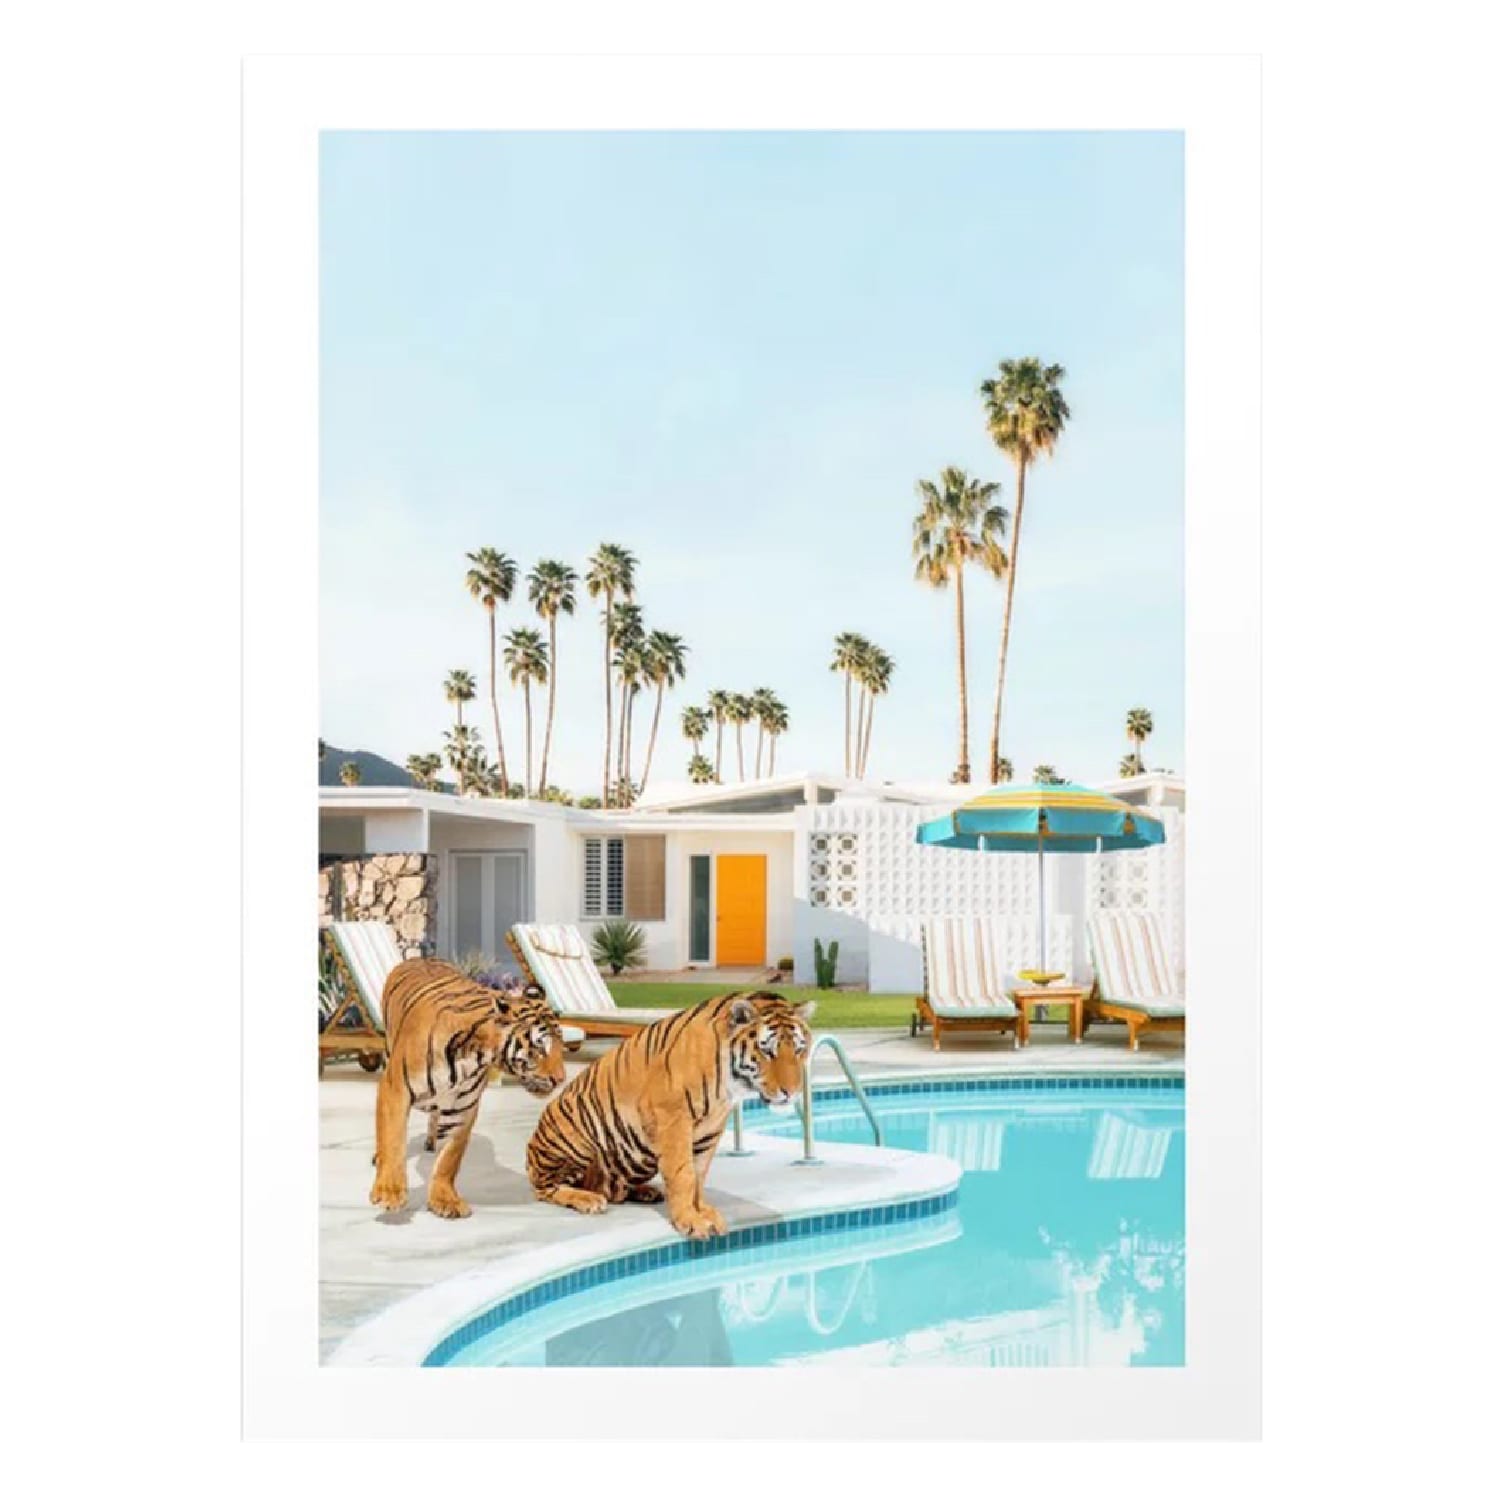 Tigers at the pool